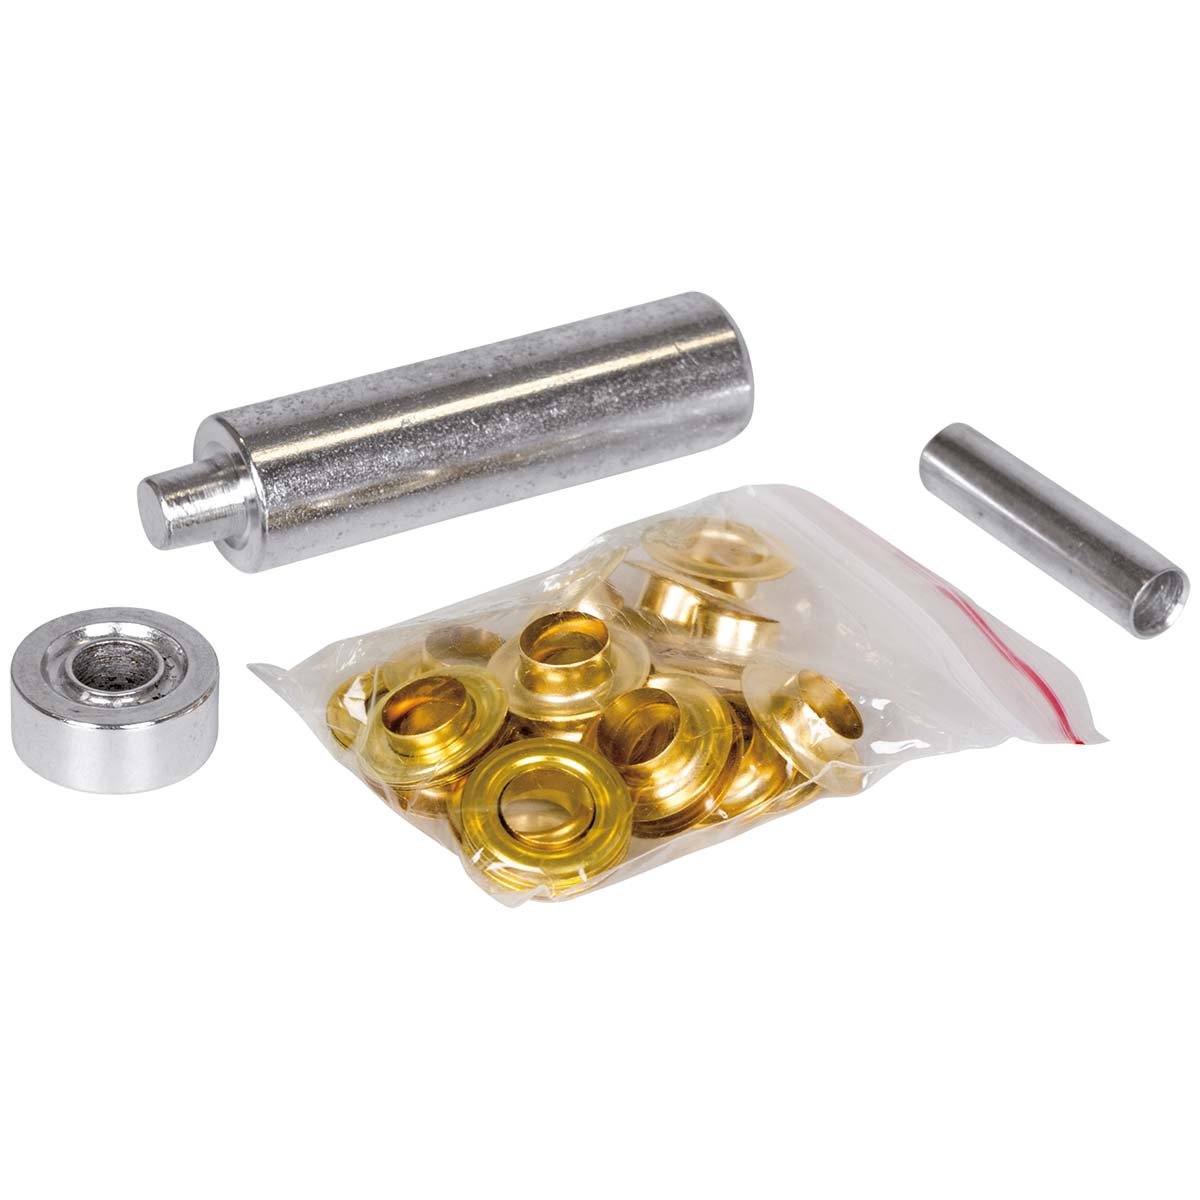 4162707 A complete set of 20 brass eyelets. Can be used in tents, tarpaulins, leather articles, cotton, etc. The sail rings are quick and easy to attach. Mounting hardware is also included, meaning, apart from this set you only need a hammer for sturdy mounting.